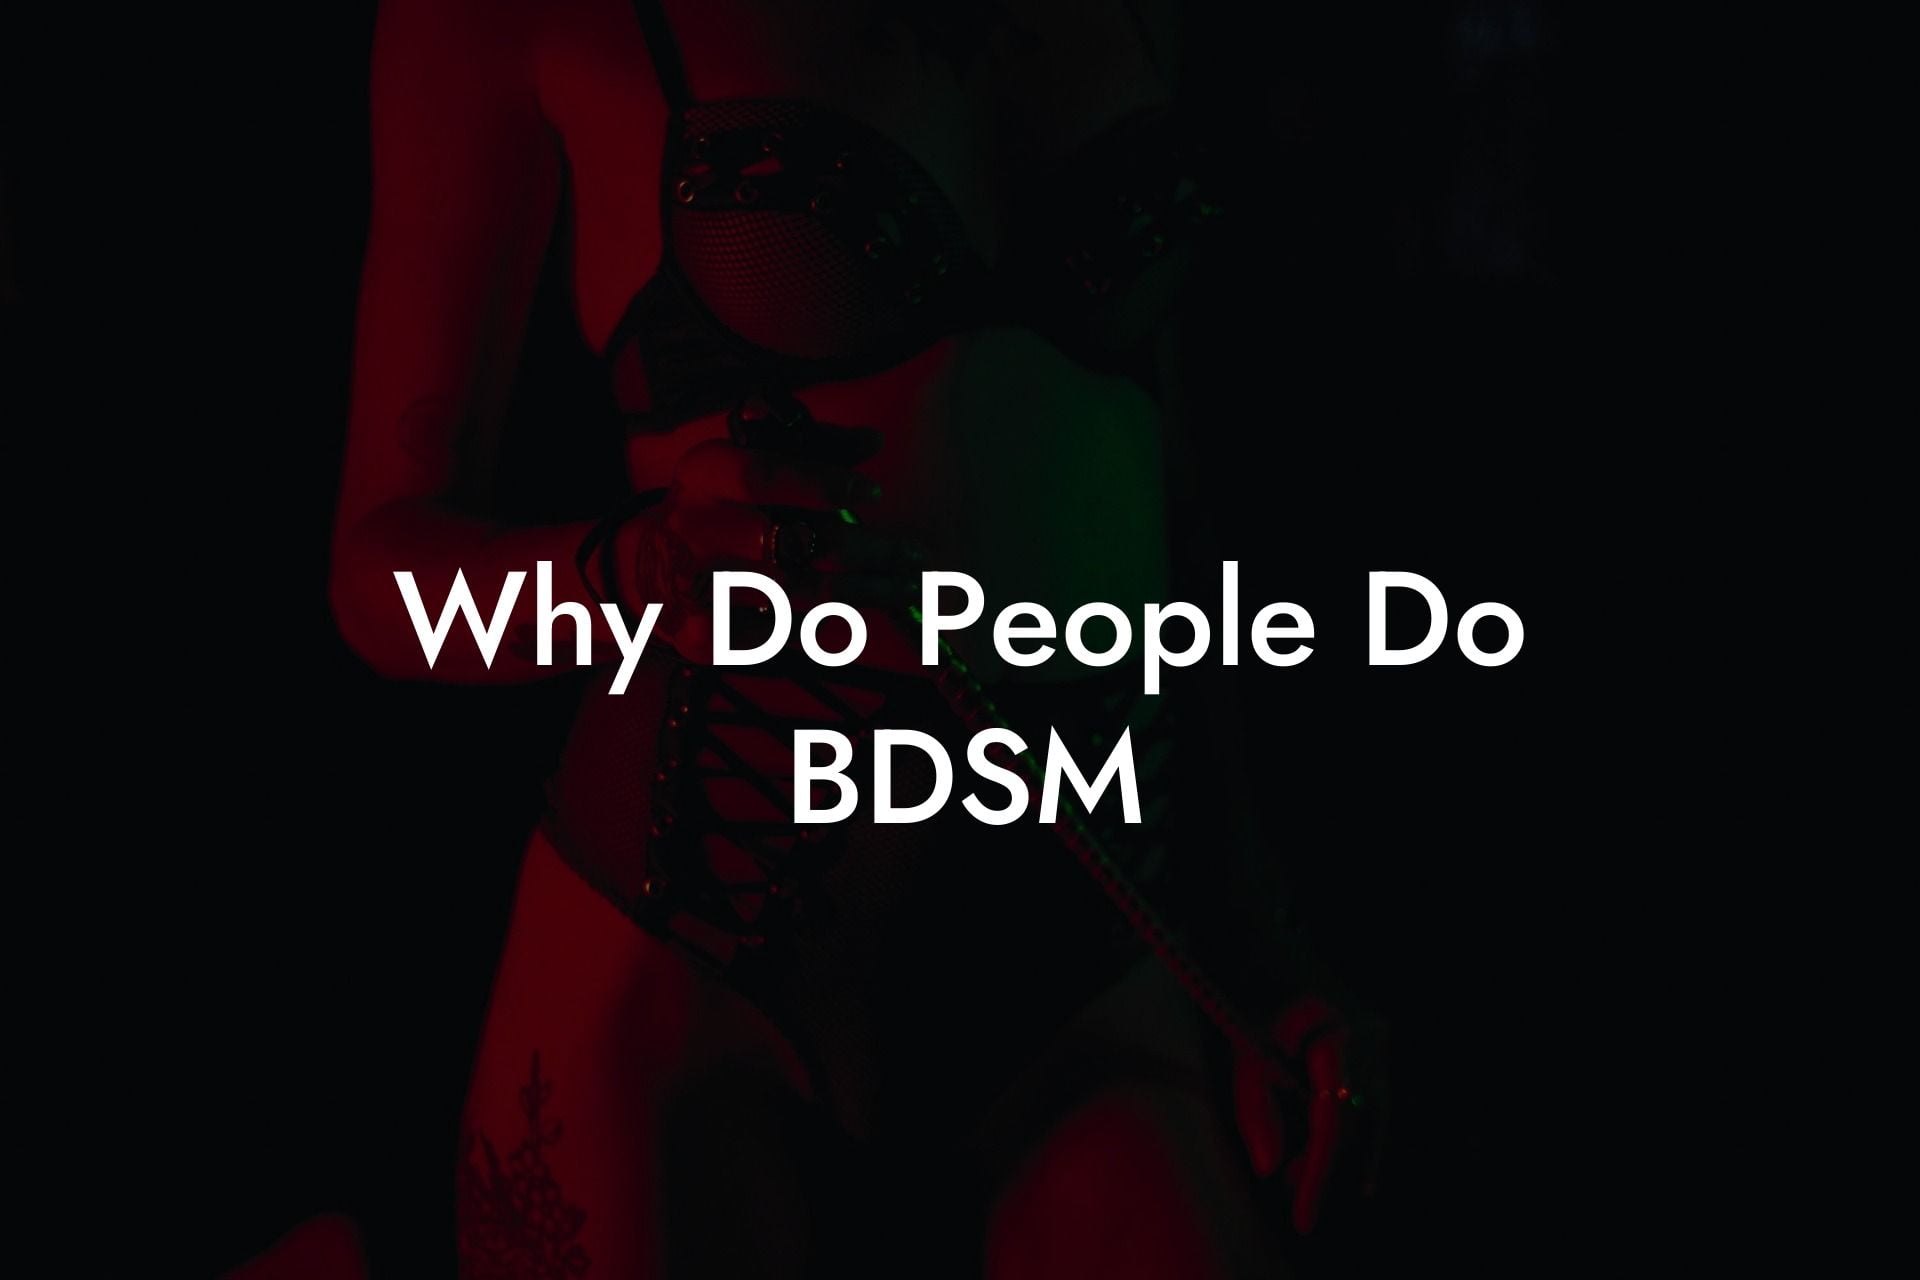 Why Do People Do BDSM